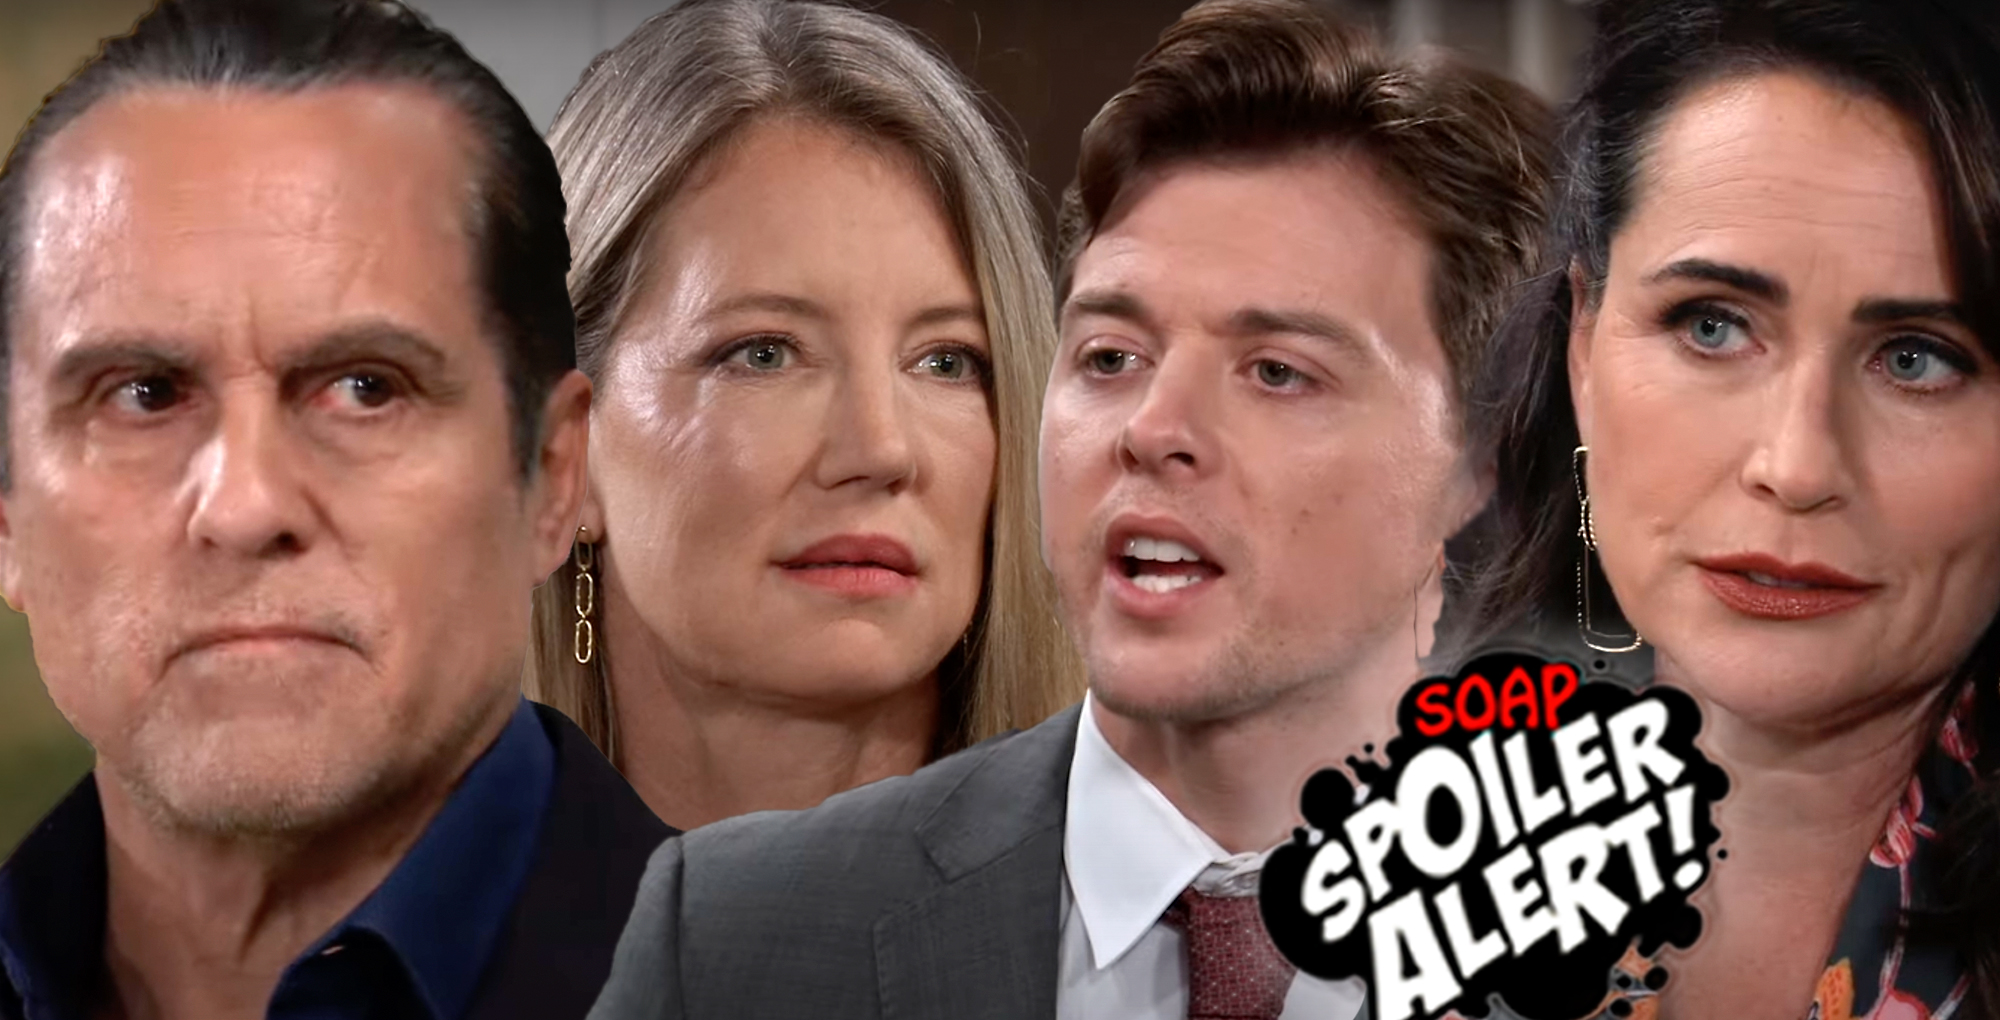 gh spoilers video promo collage of sonny, nina, michael, lois.